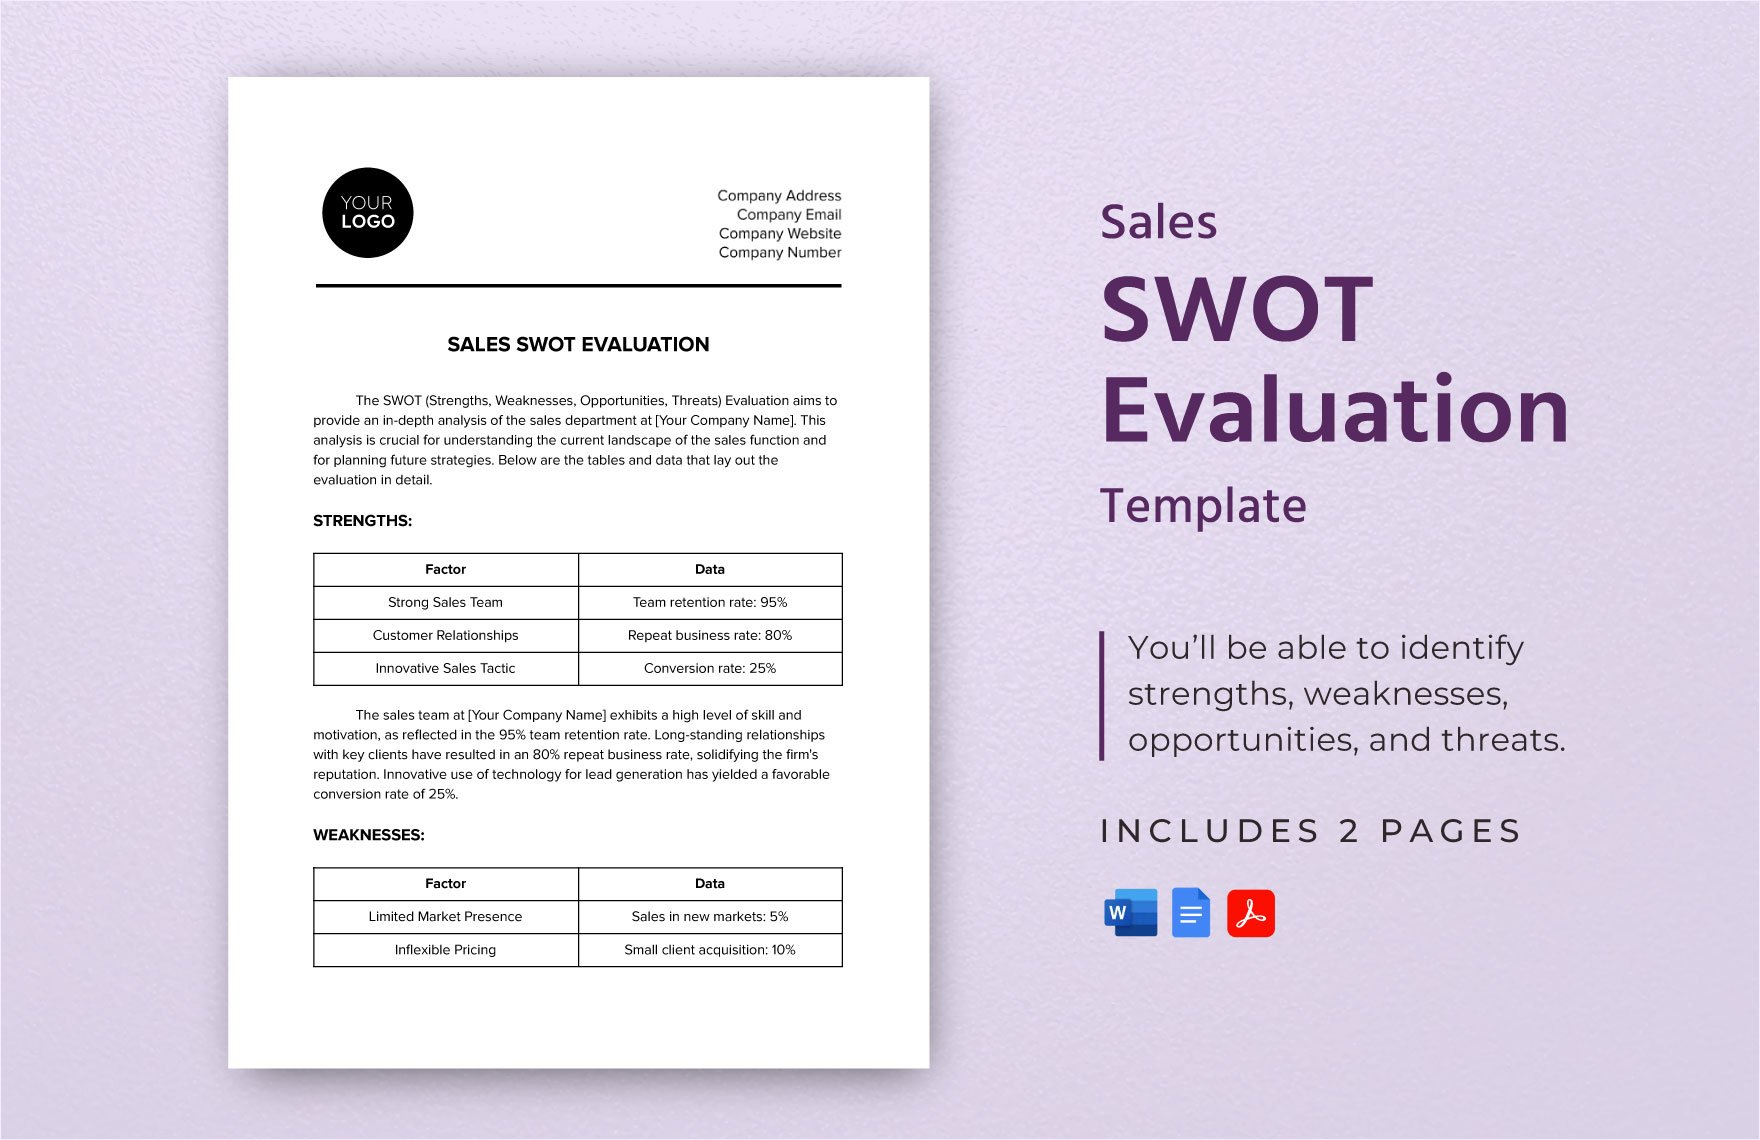 Sales SWOT Evaluation Template in Word, Google Docs, PDF